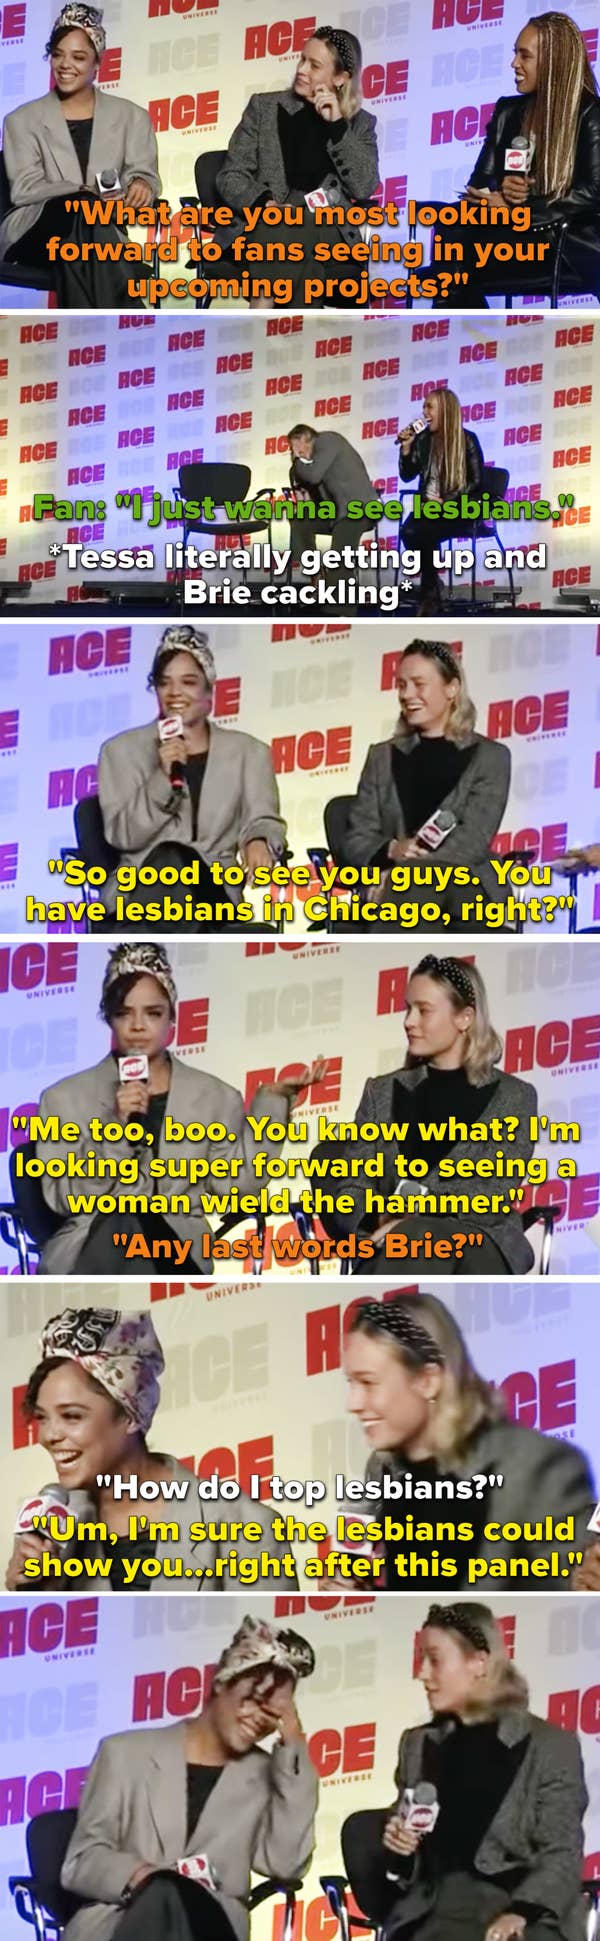 21. When Brie Larson walked right into Tessa Thompson's joke about lesbians and Tessa burst out laughing.